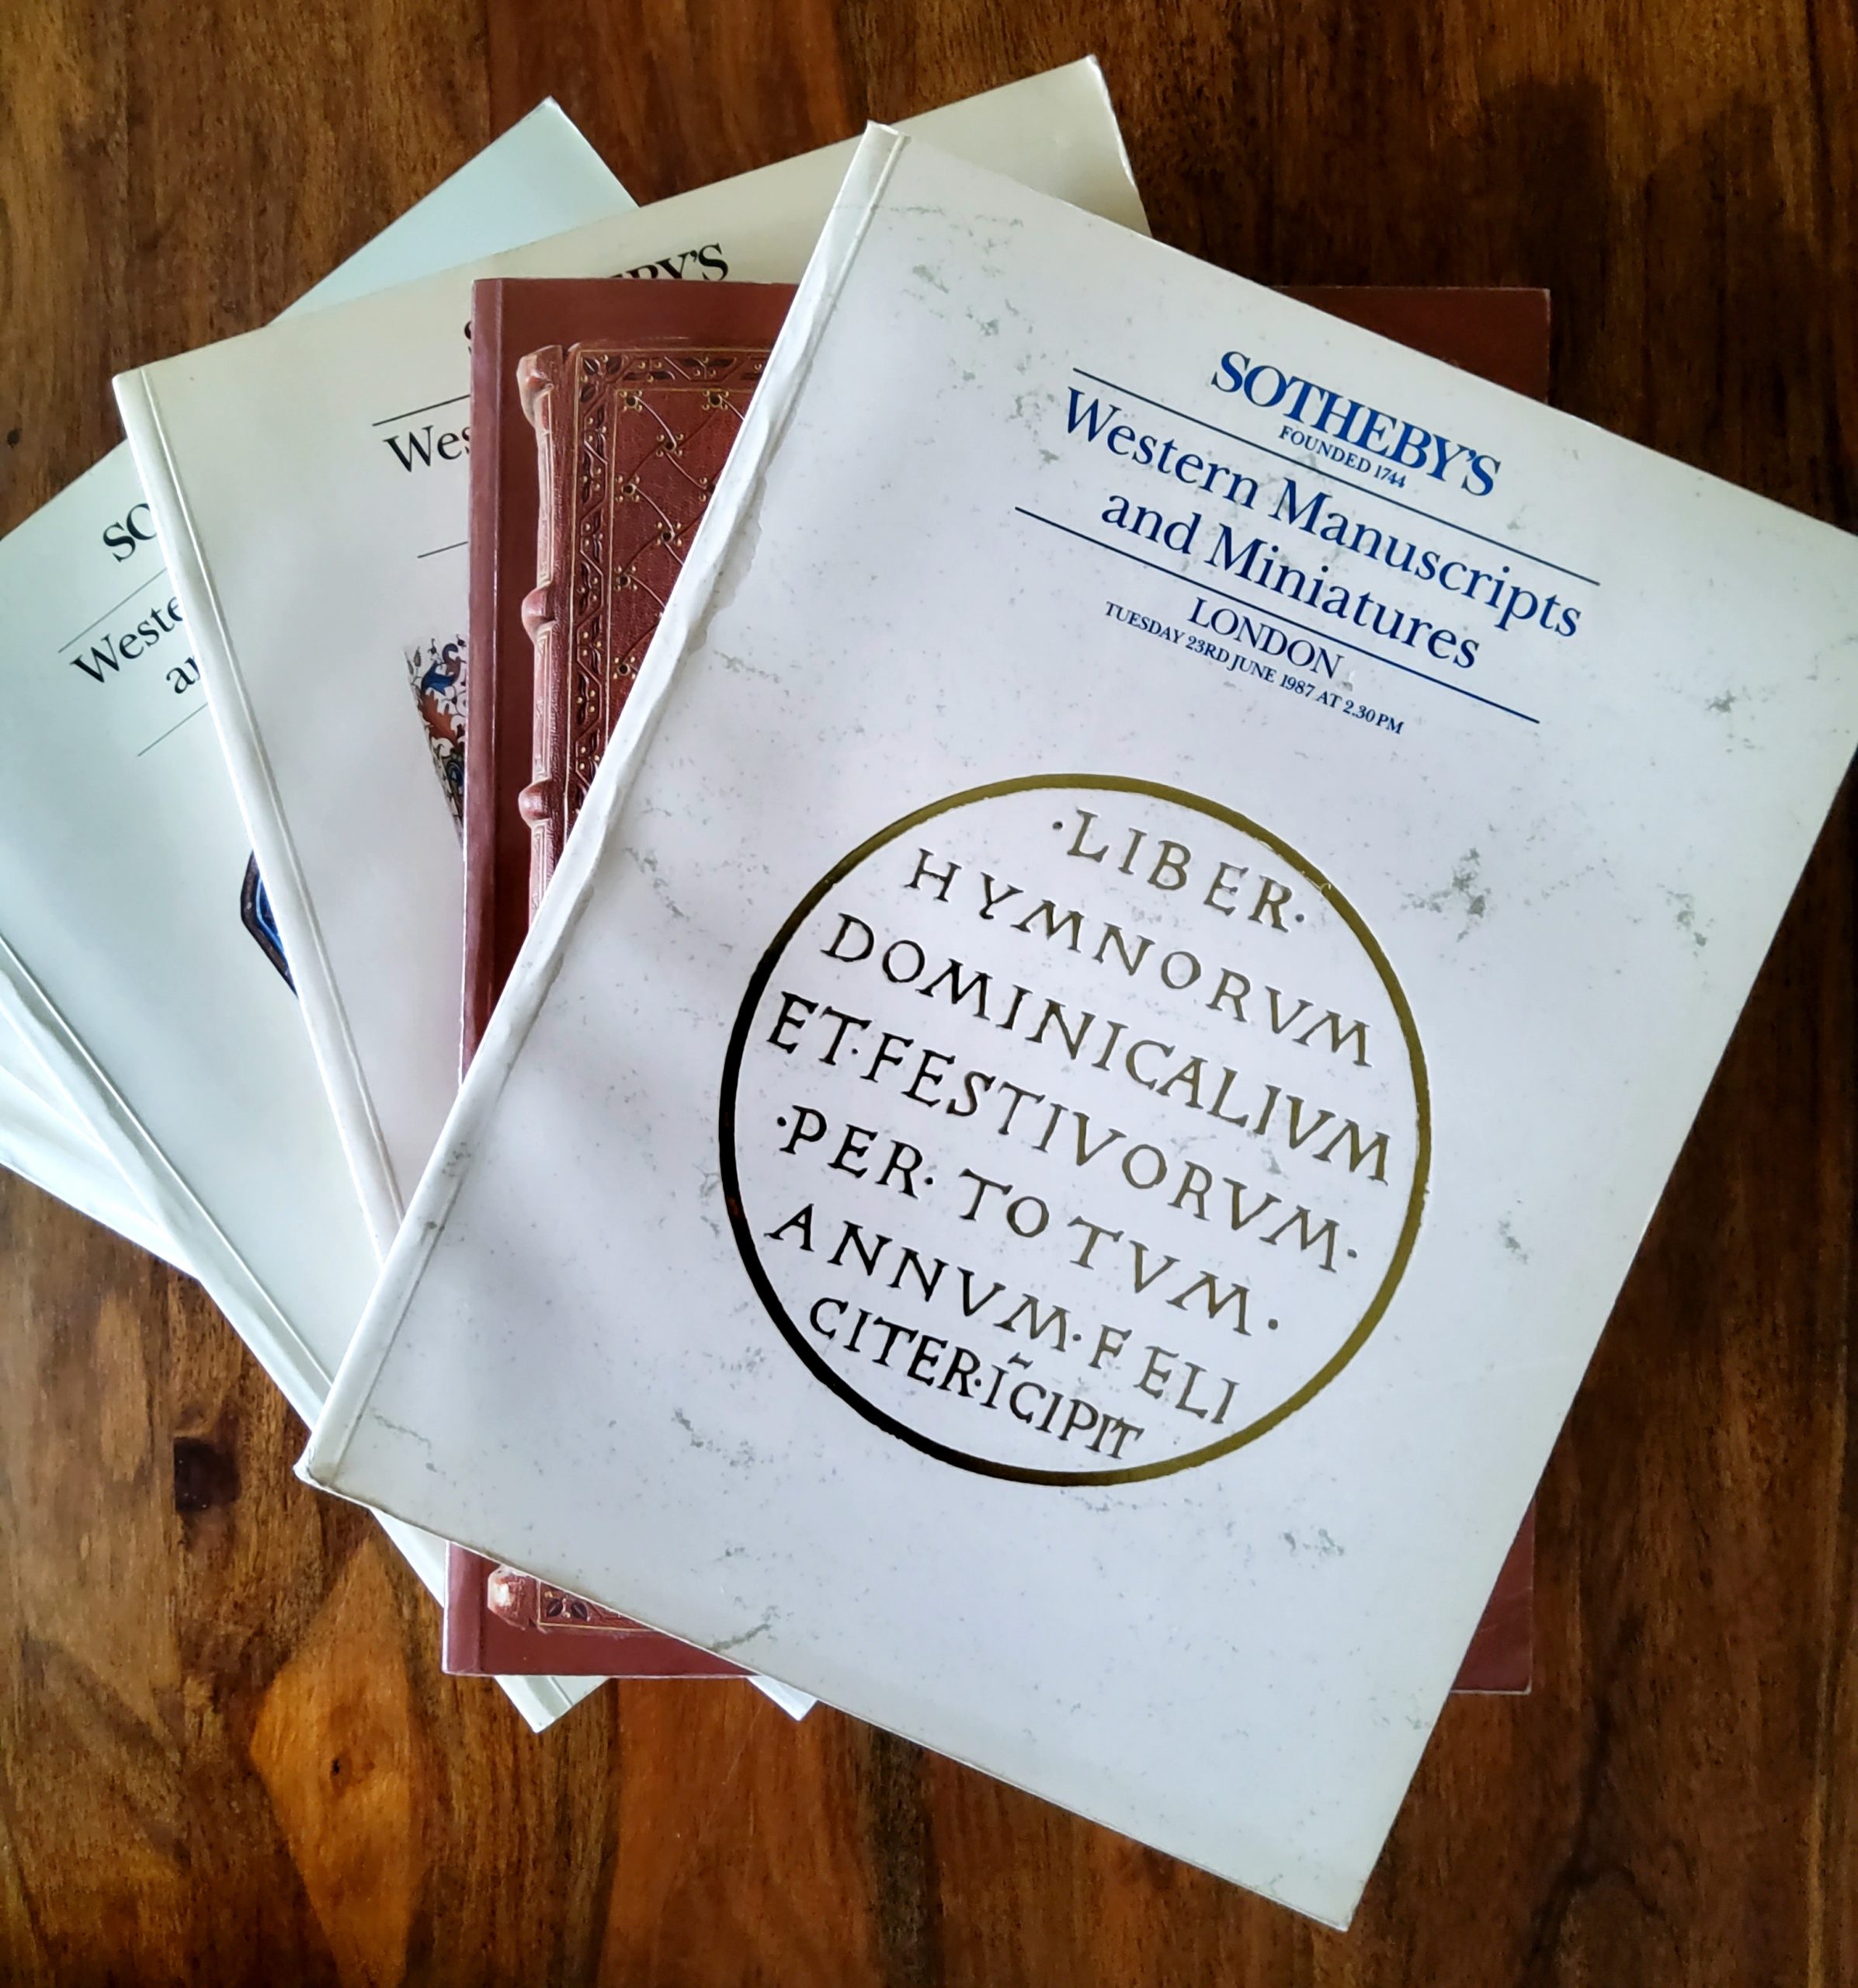 Sotheby’s Catalogues of Western Manuscripts and Miniatures. 8 volumes. 1983-1987